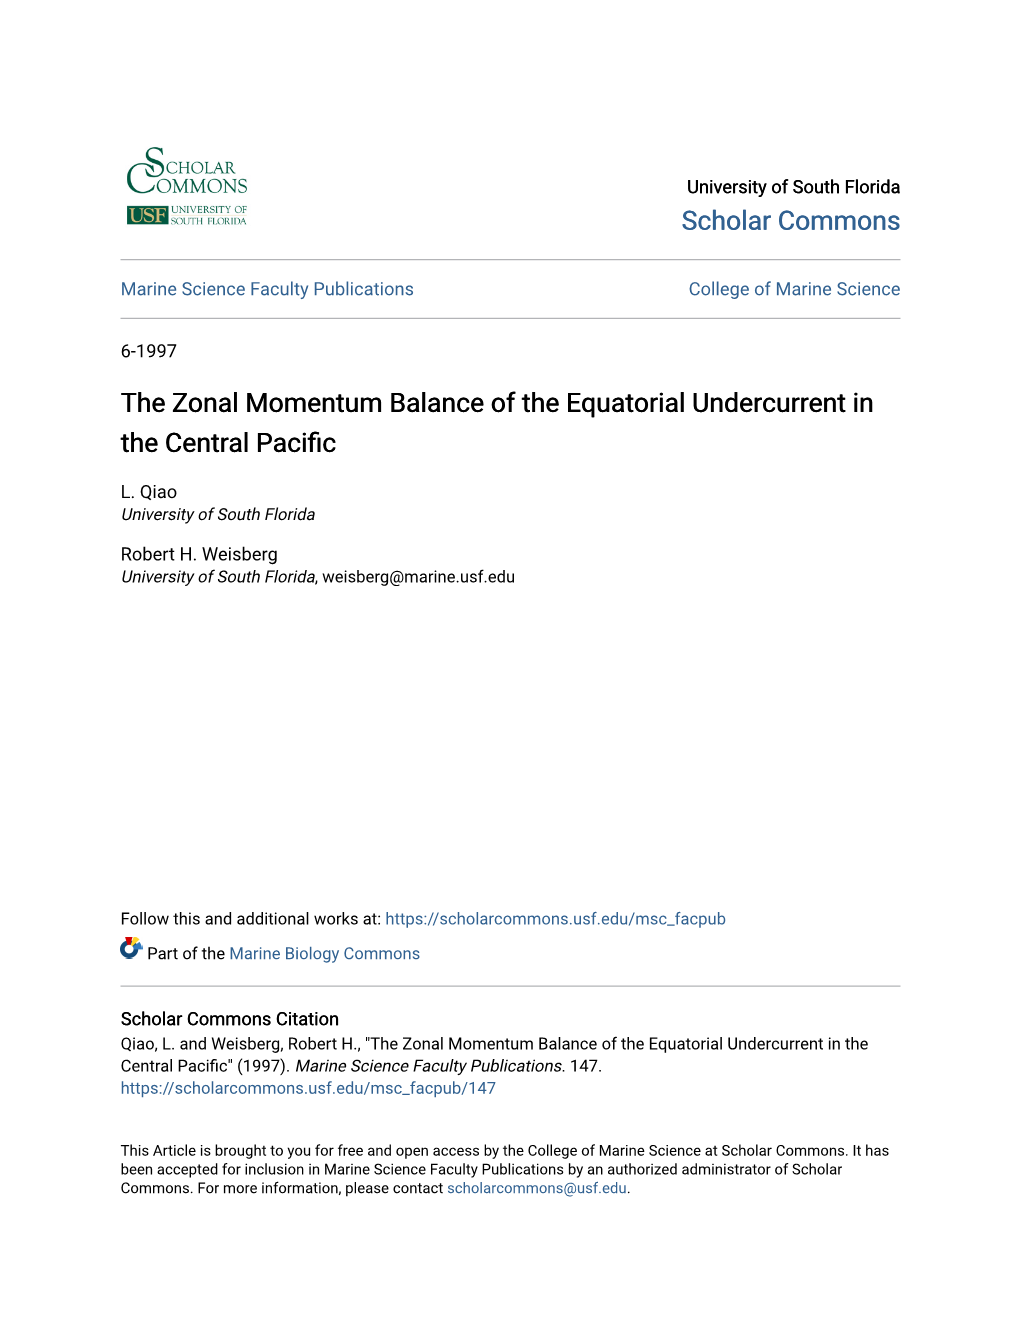 The Zonal Momentum Balance of the Equatorial Undercurrent in the Central Pacific